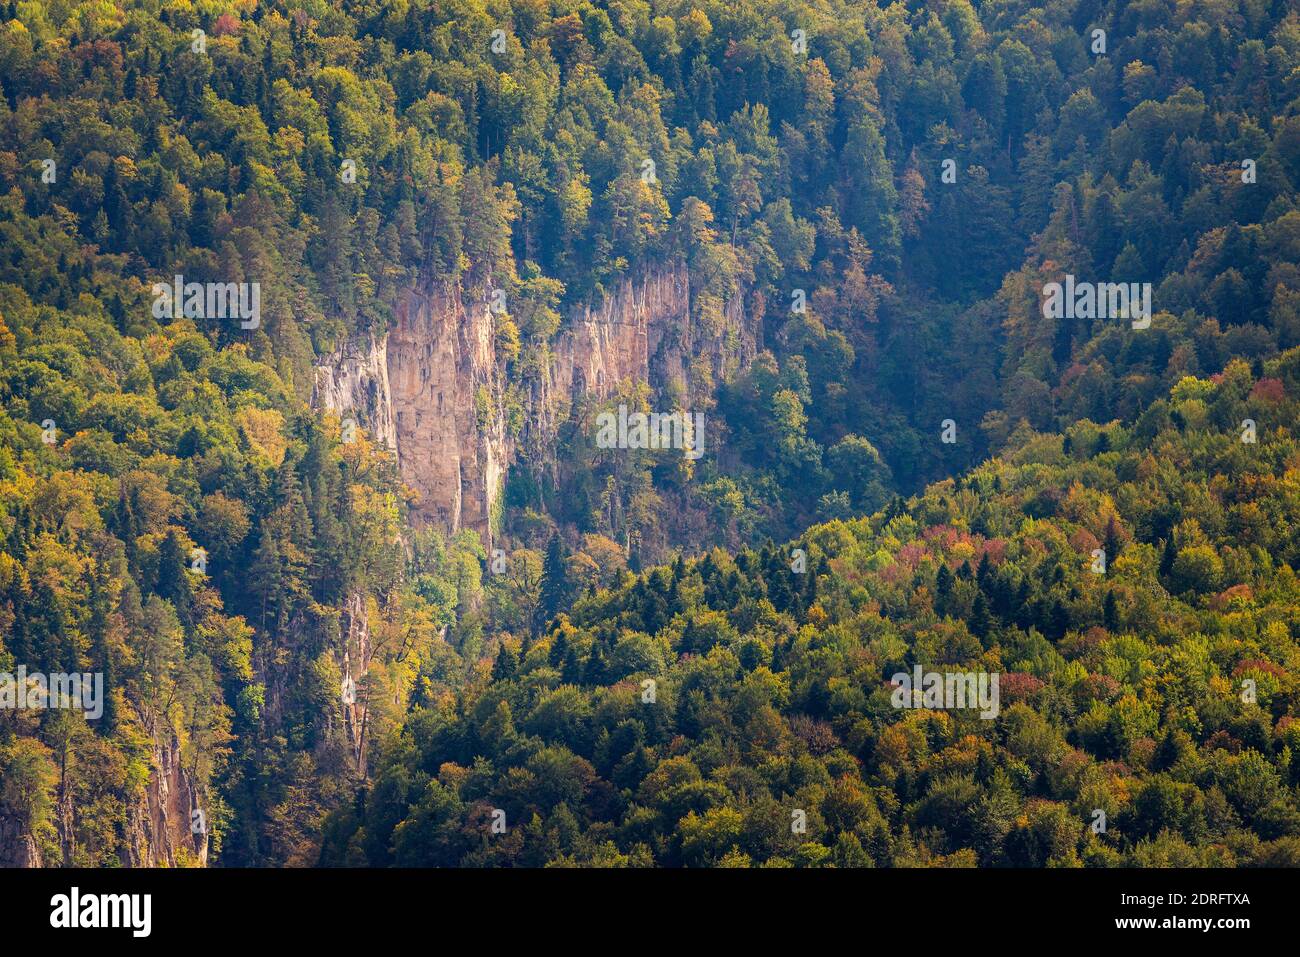 Mountain landscape. Gorge and mountains covered by forest. Stock Photo